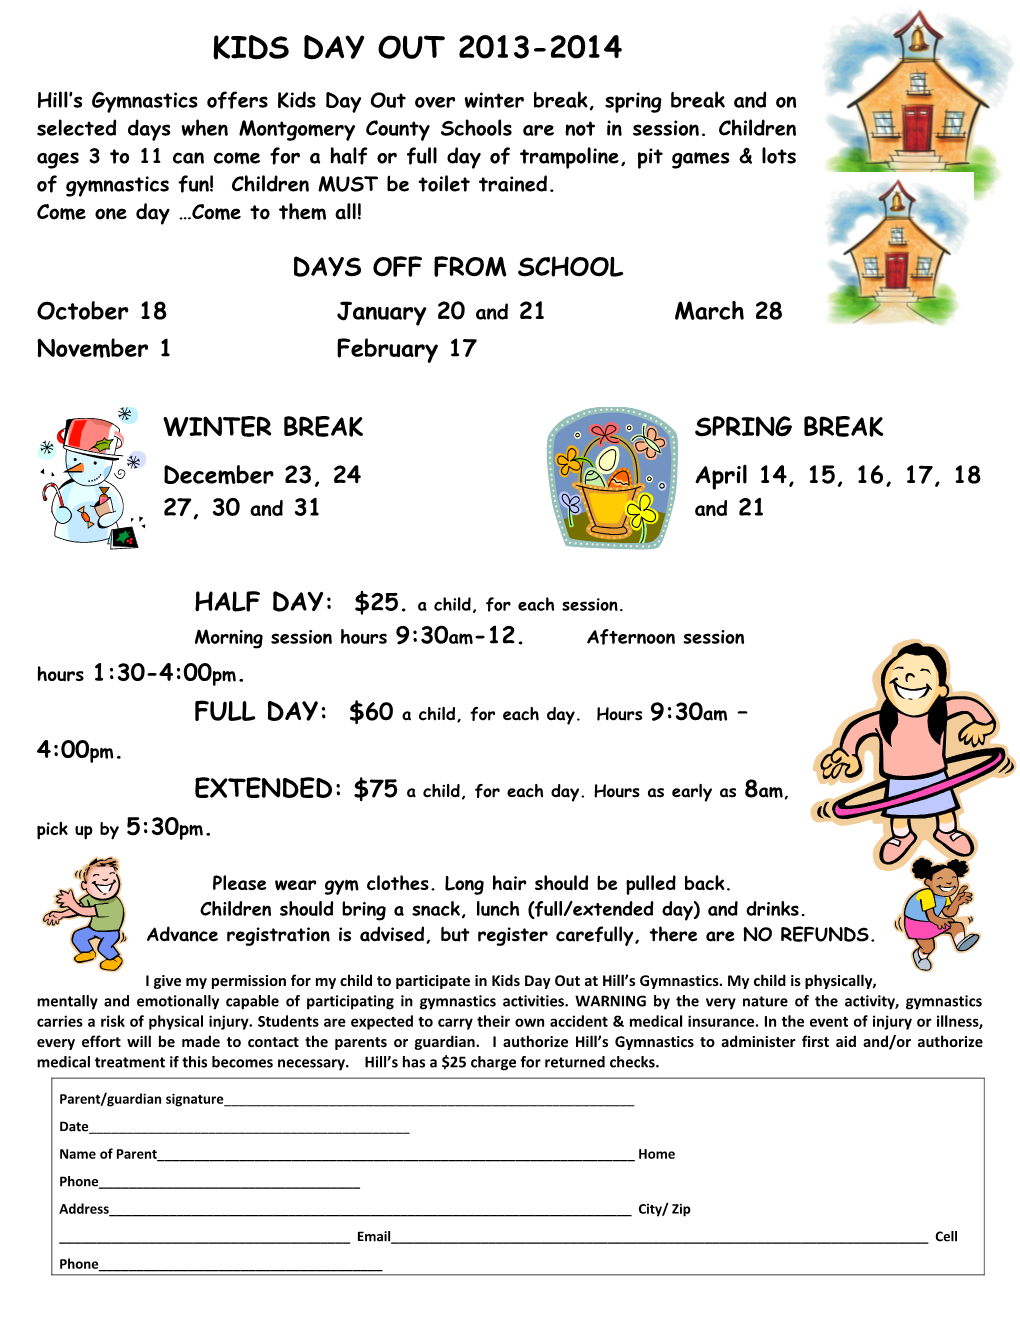 Hill S Gymnastics Offers Kids Day out Over Winter Break, Spring Break and on Selected